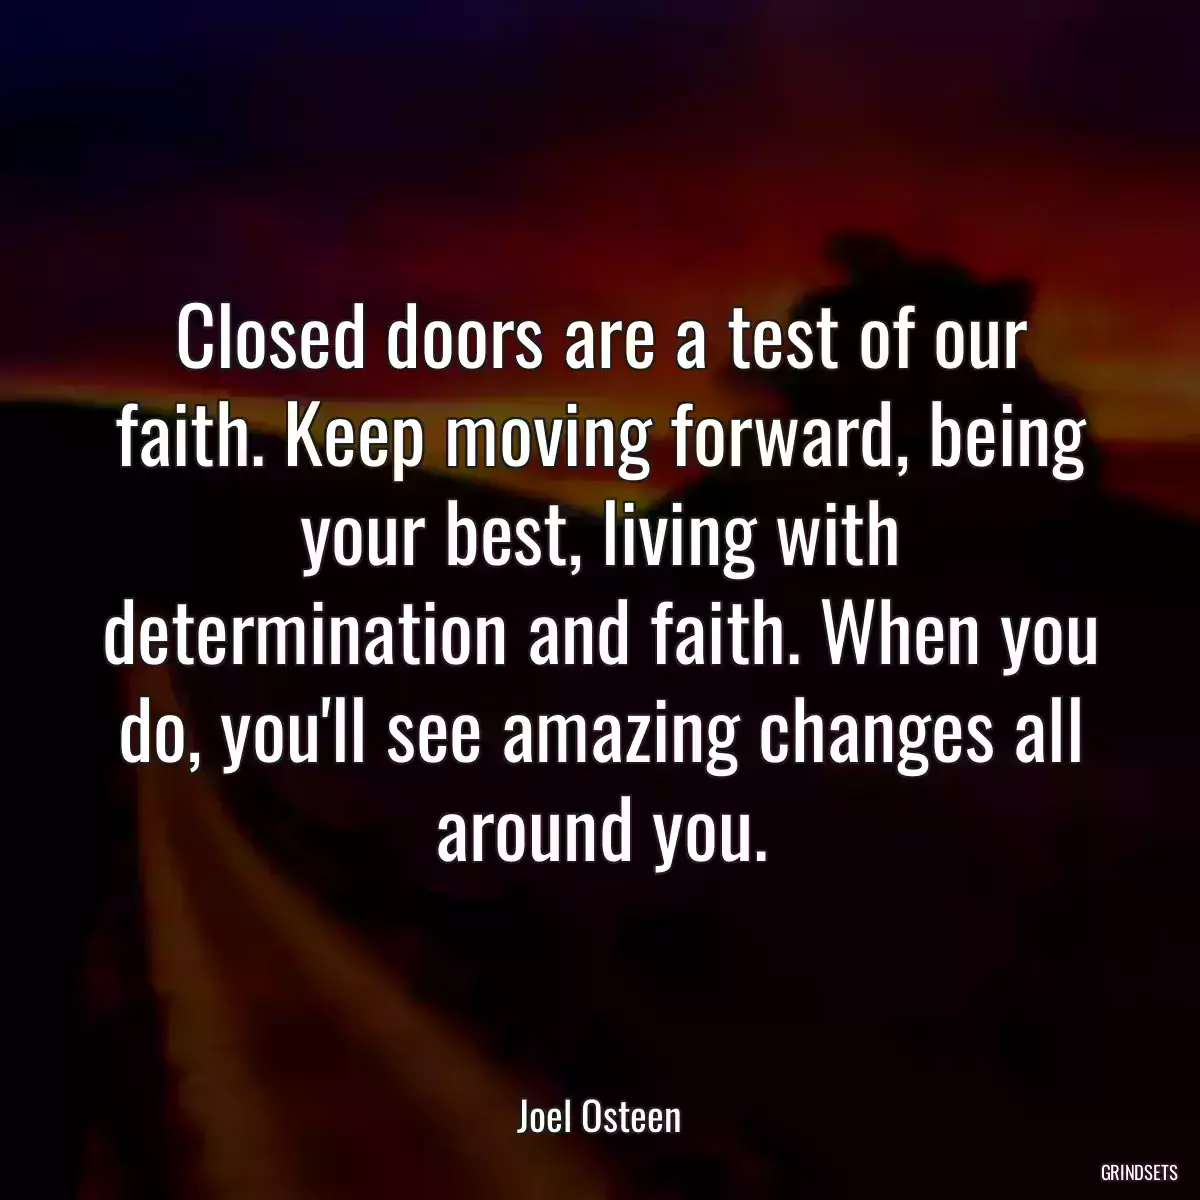 Closed doors are a test of our faith. Keep moving forward, being your best, living with determination and faith. When you do, you\'ll see amazing changes all around you.